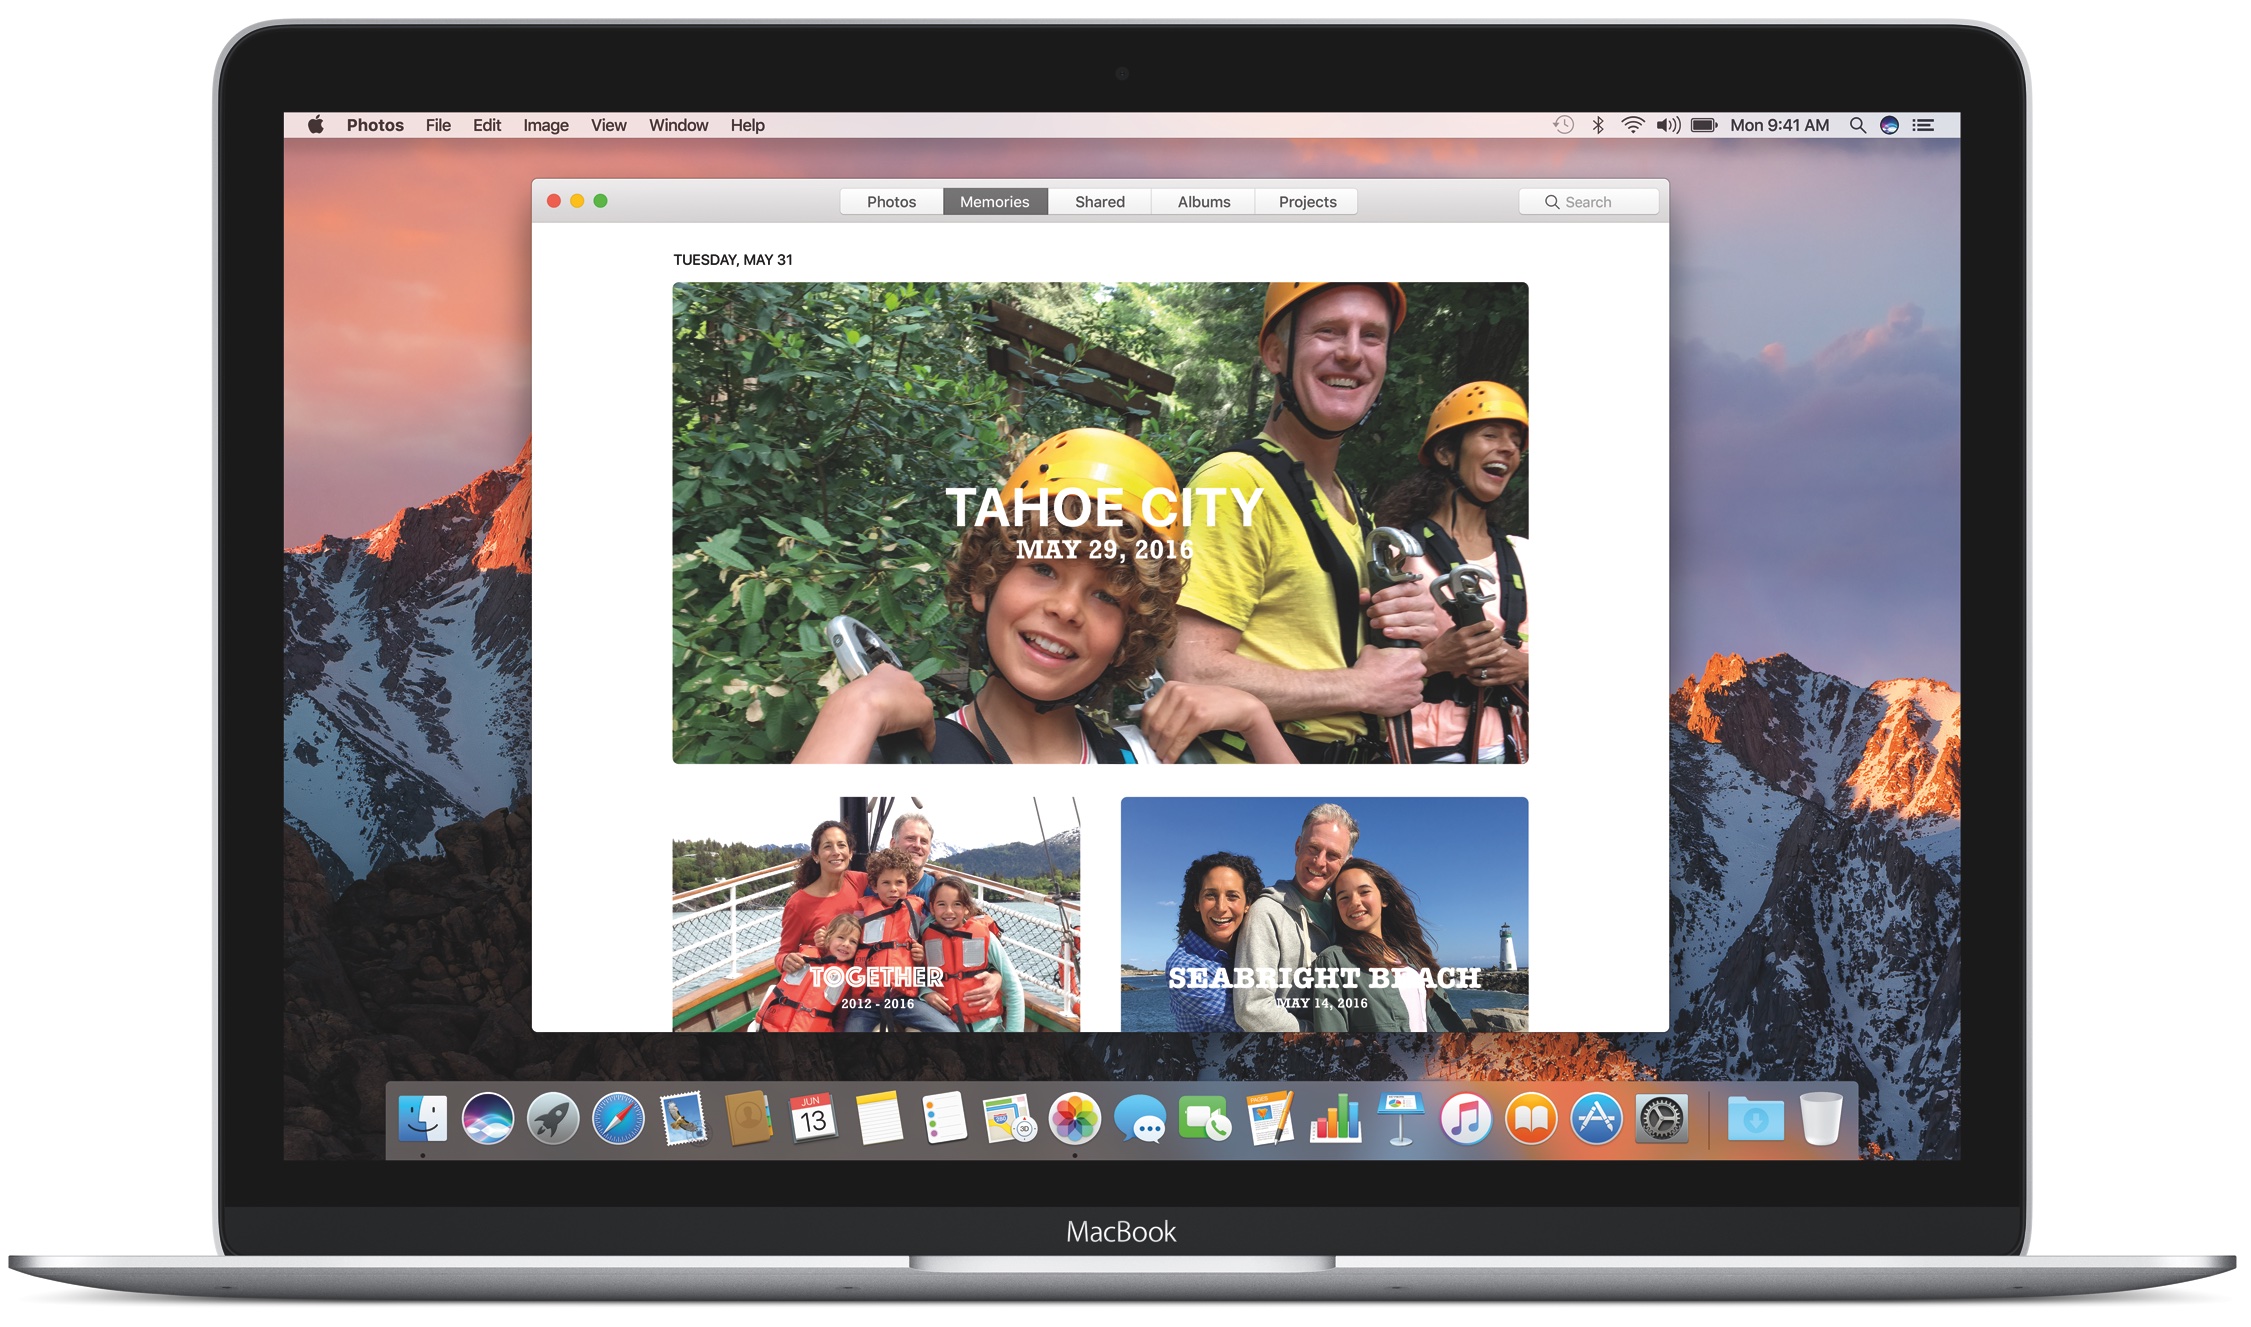 Find photo library on mac